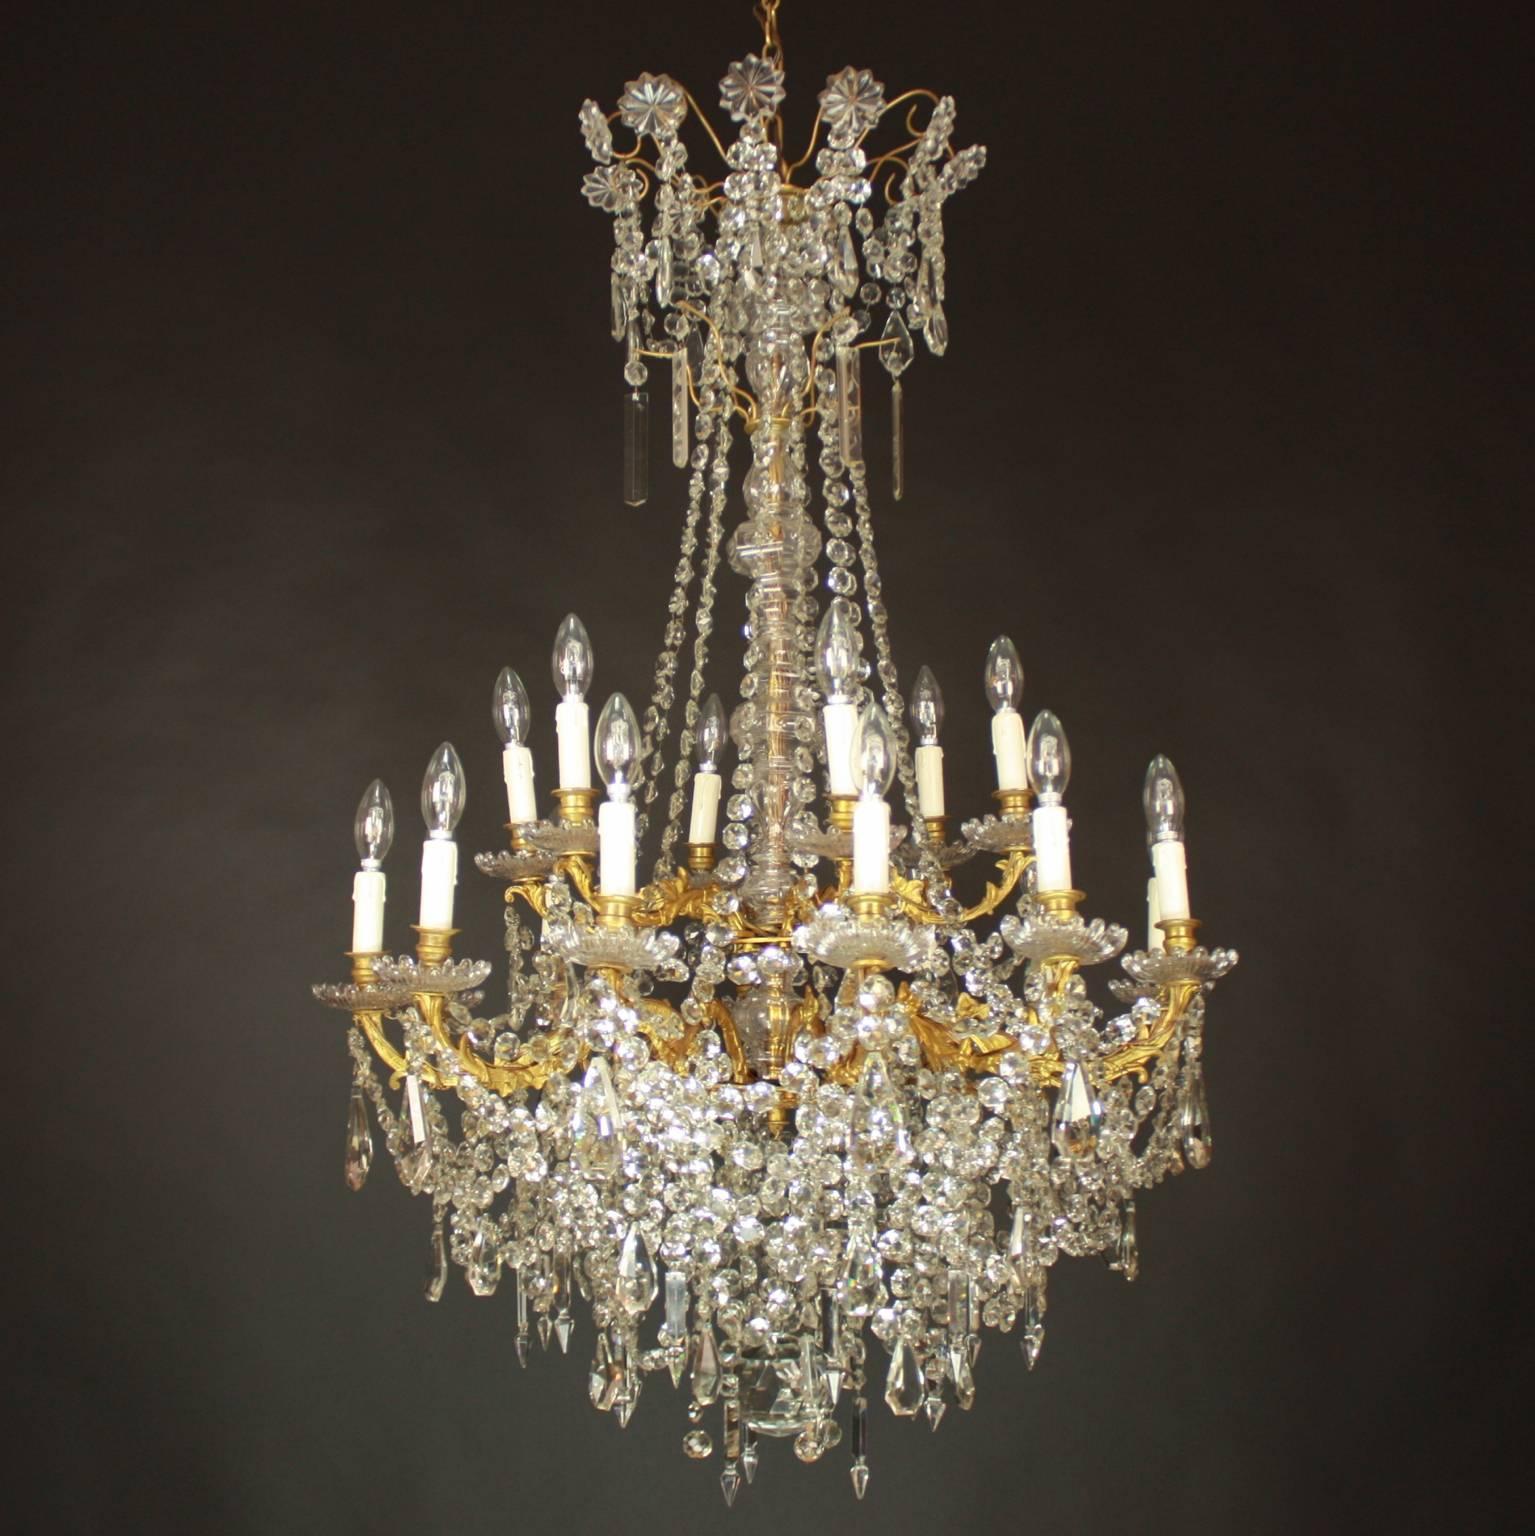 A Large Louis XV style gilt-bronze and cut-crystal eighteen light chandelier, with a central cut-crystal baluster stem issuing two rows of gilt-bronze branches finally cast and chased with foliage. The branches support gilt-bronze nozzles with glass